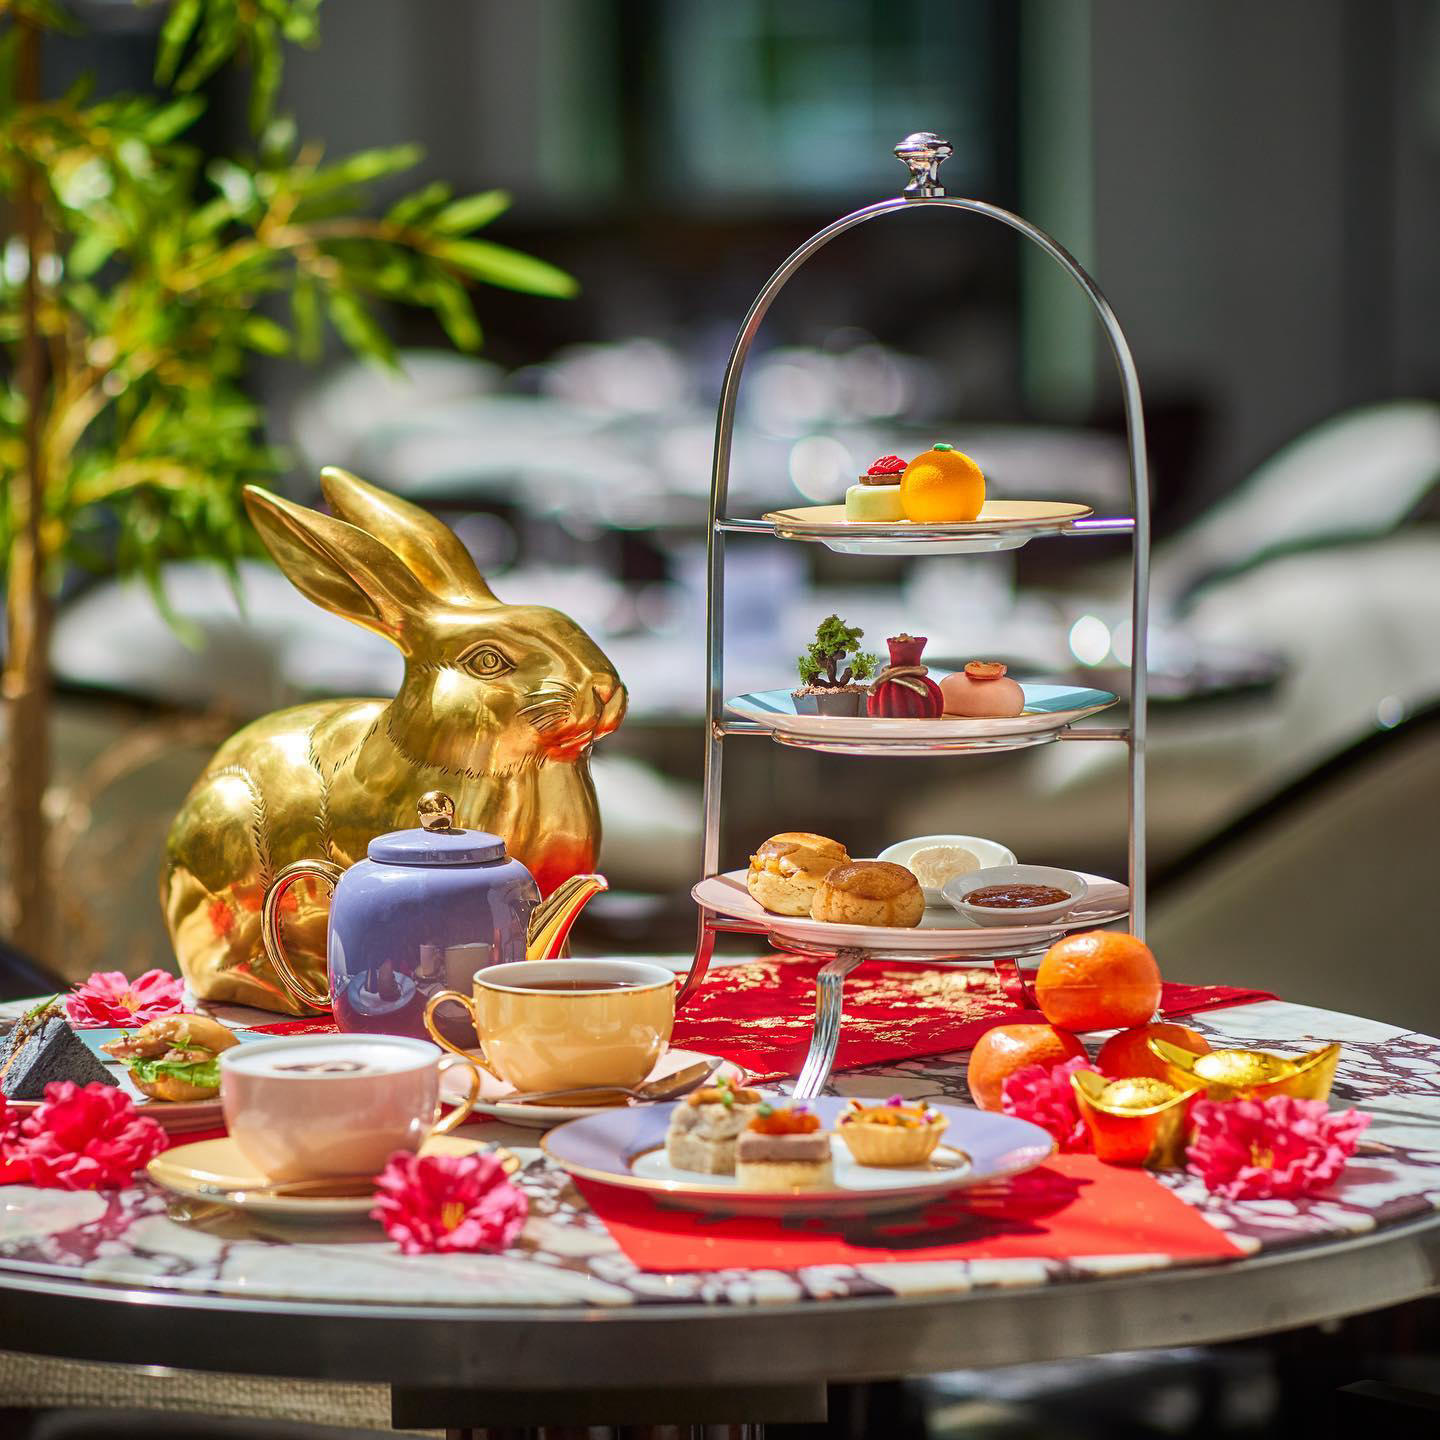 Be our guest at The Drawing Room as we unveil our decadent Great Happiness Afternoon Tea this Chines